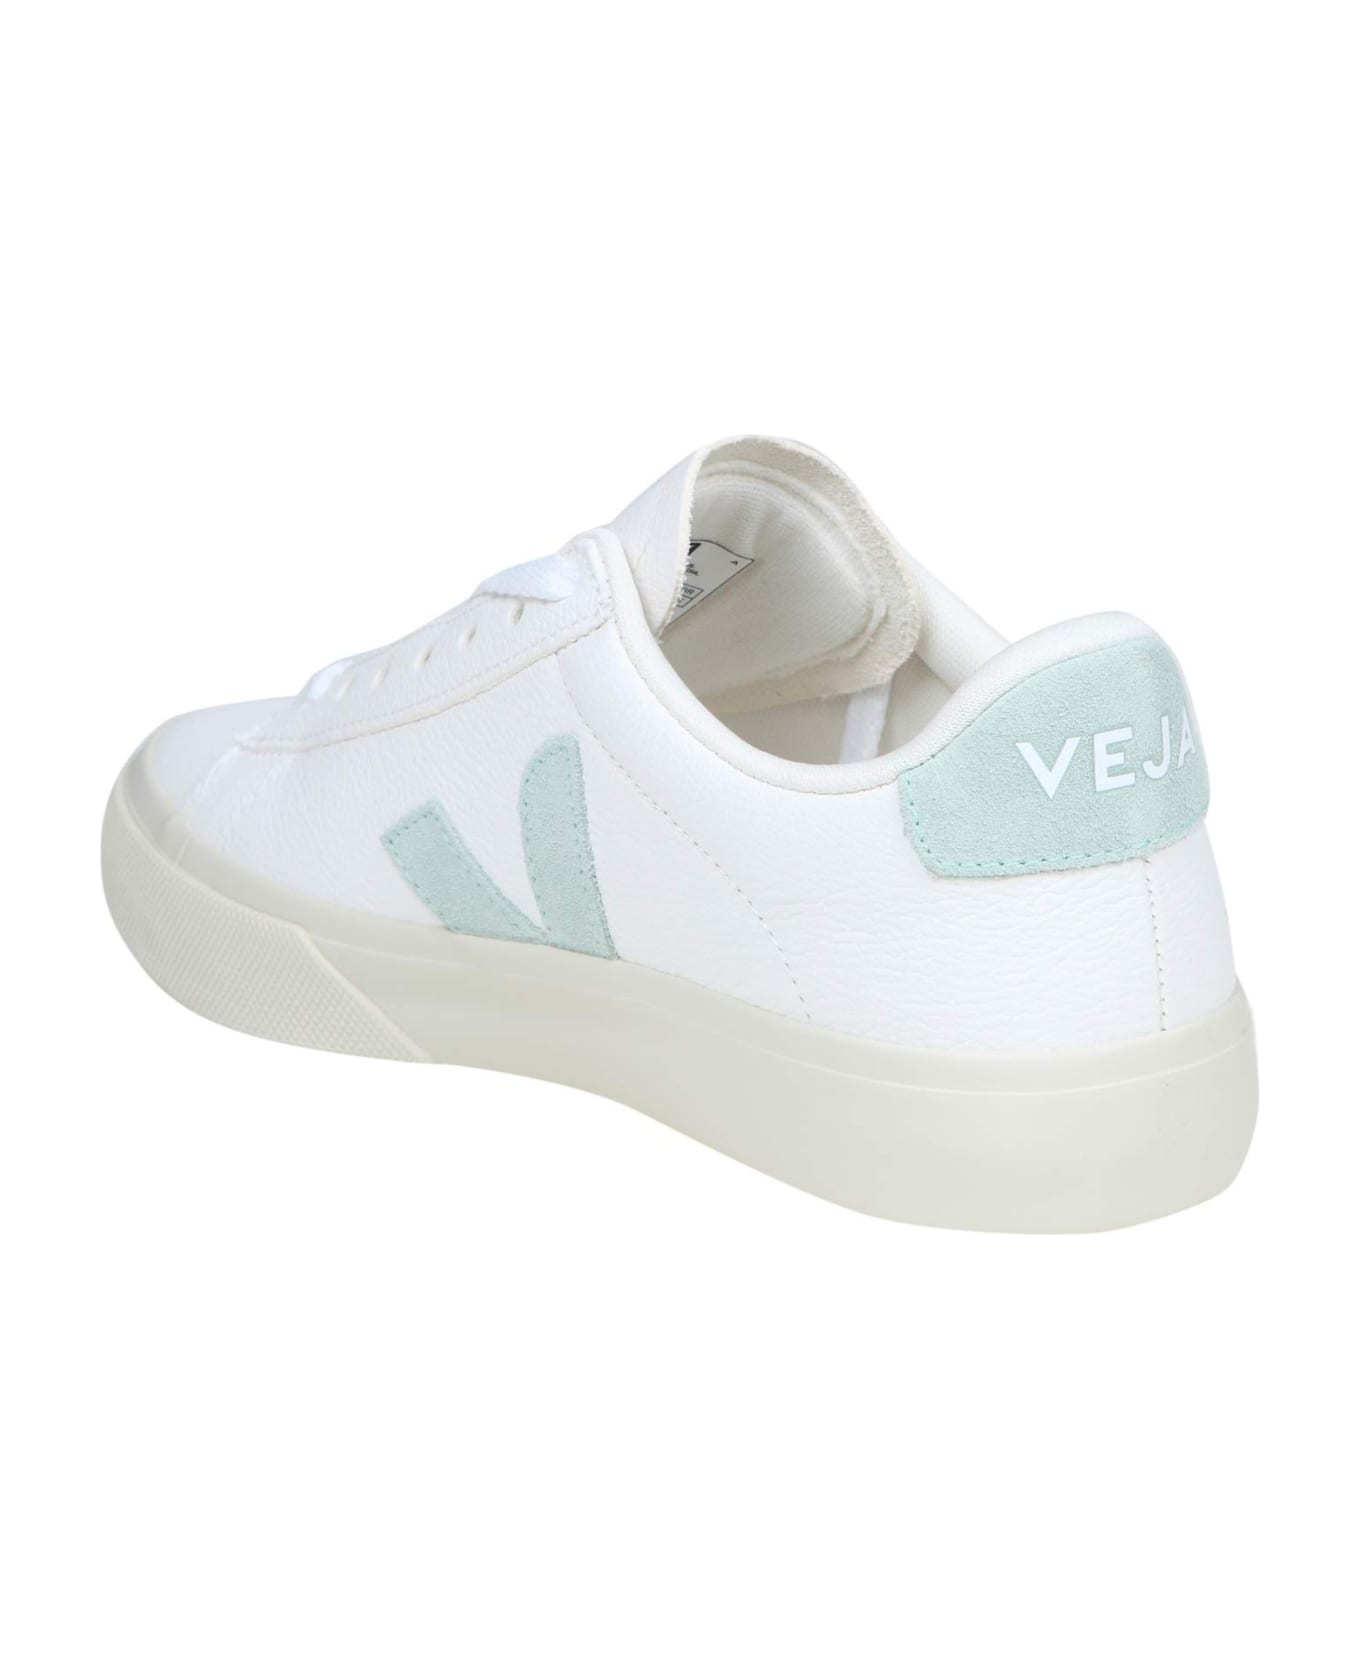 Veja Campo Chromefree In White/green Leather - White/matcha 